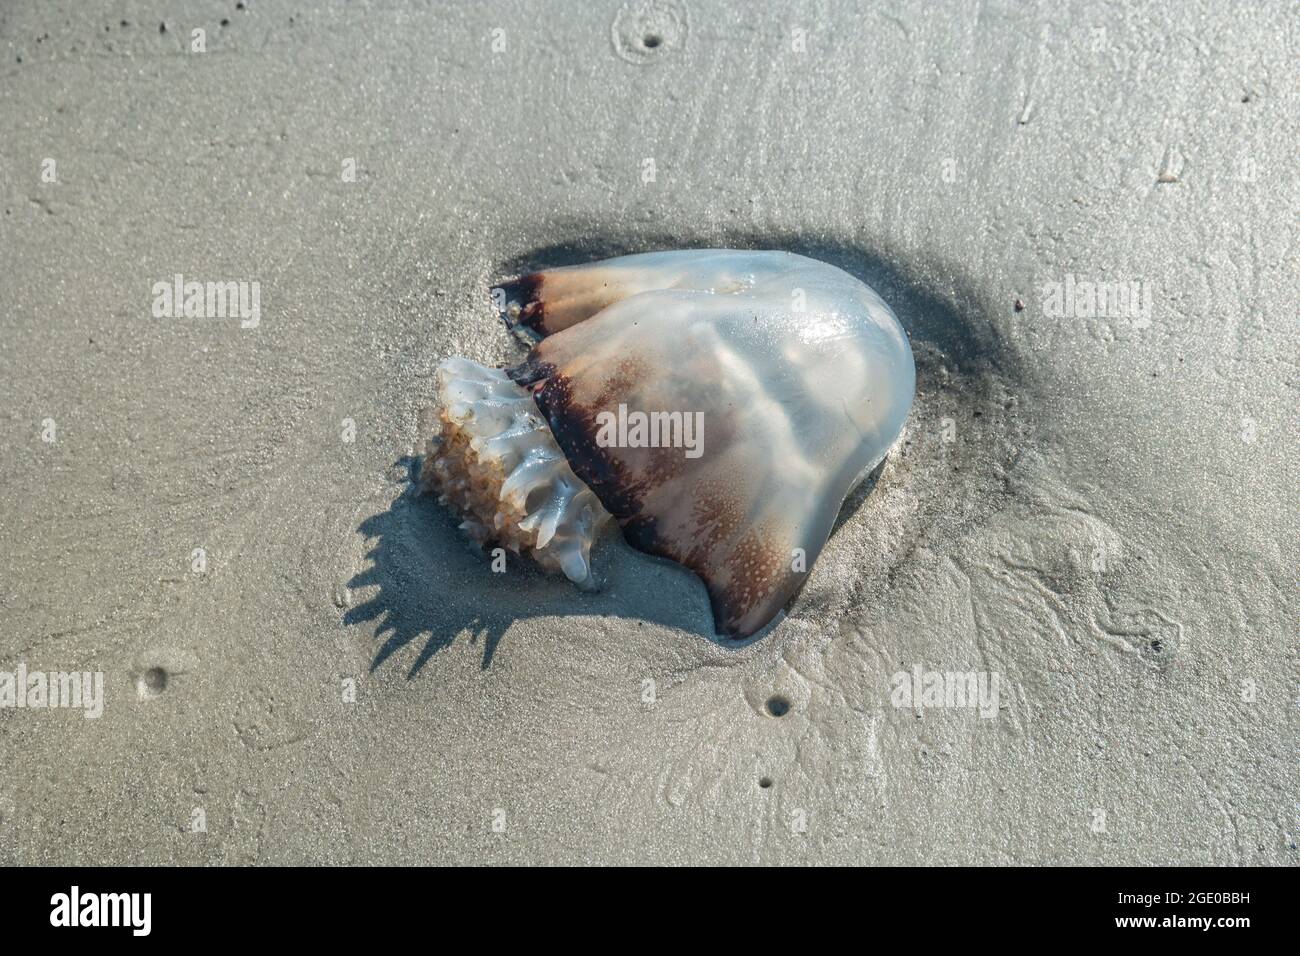 A translucent jellyfish with some color washed ashore partially buried in the sand on the beach at the ocean on a bright sunny day looking downwards c Stock Photo